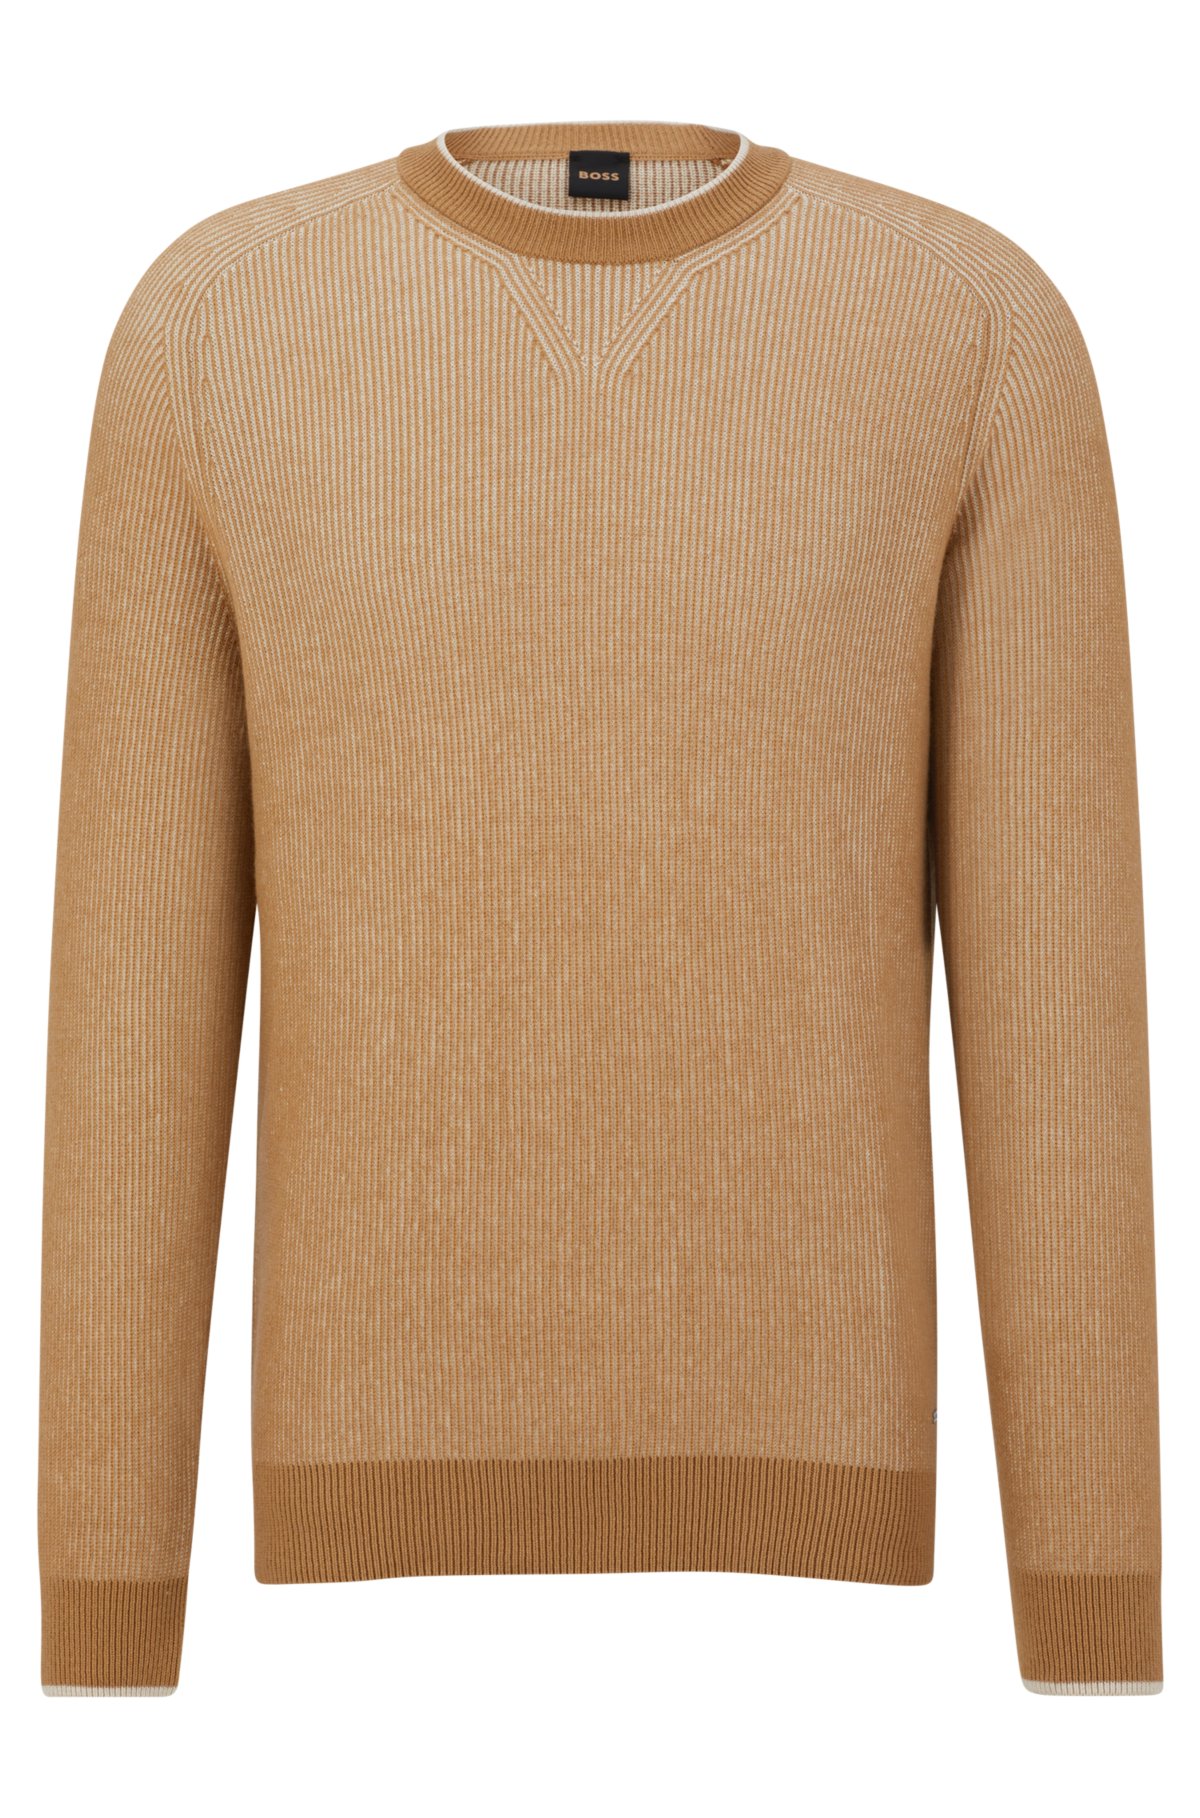 BOSS - Mixed-structure sweater in cotton, cashmere and wool